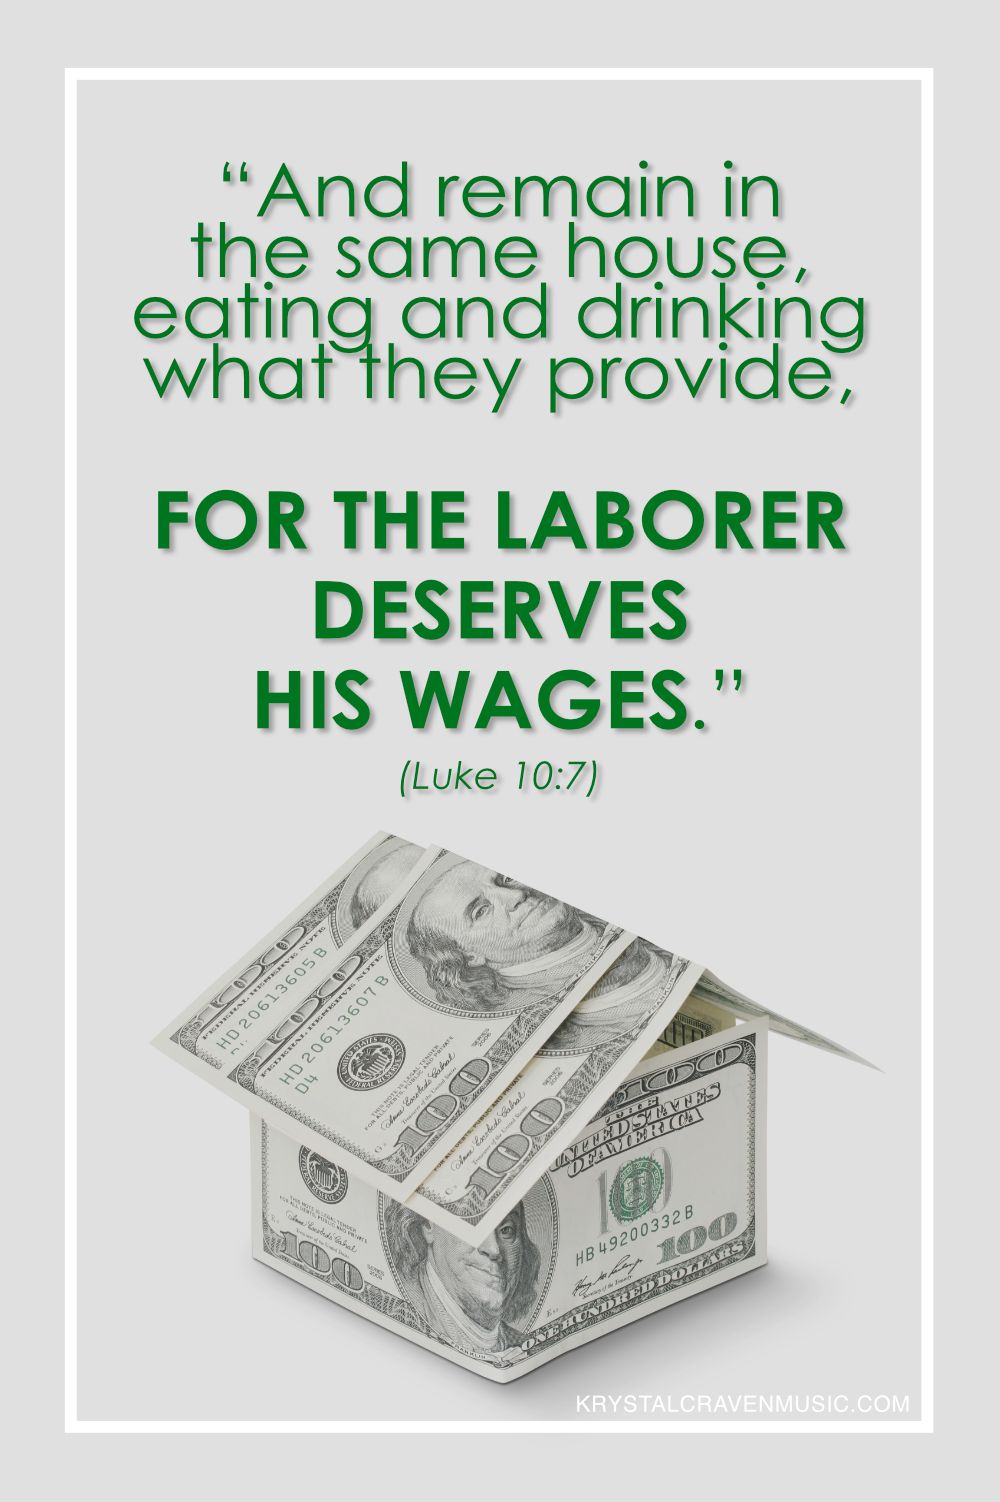 The Bible verse text from Luke 10:7: "And remain in the same house, eating and drinking what they provide, for the laborer deserves his wages." This text appears above a paper house made of five $100 bills.